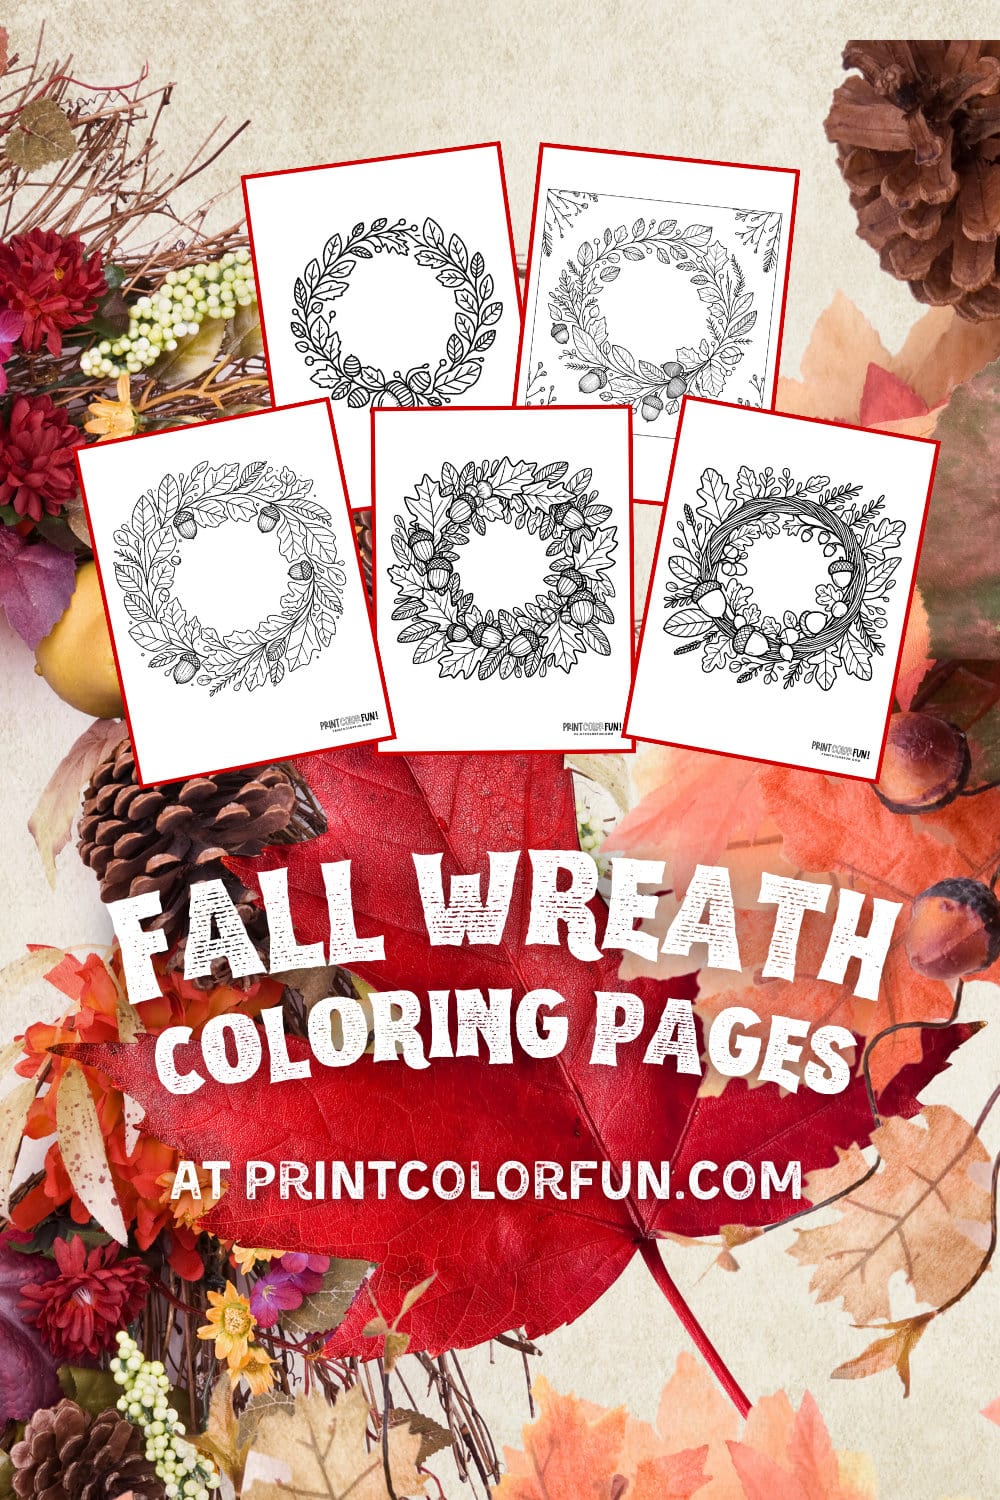 Fall wreath autumn coloring pages and clipart - PrintColorFun com